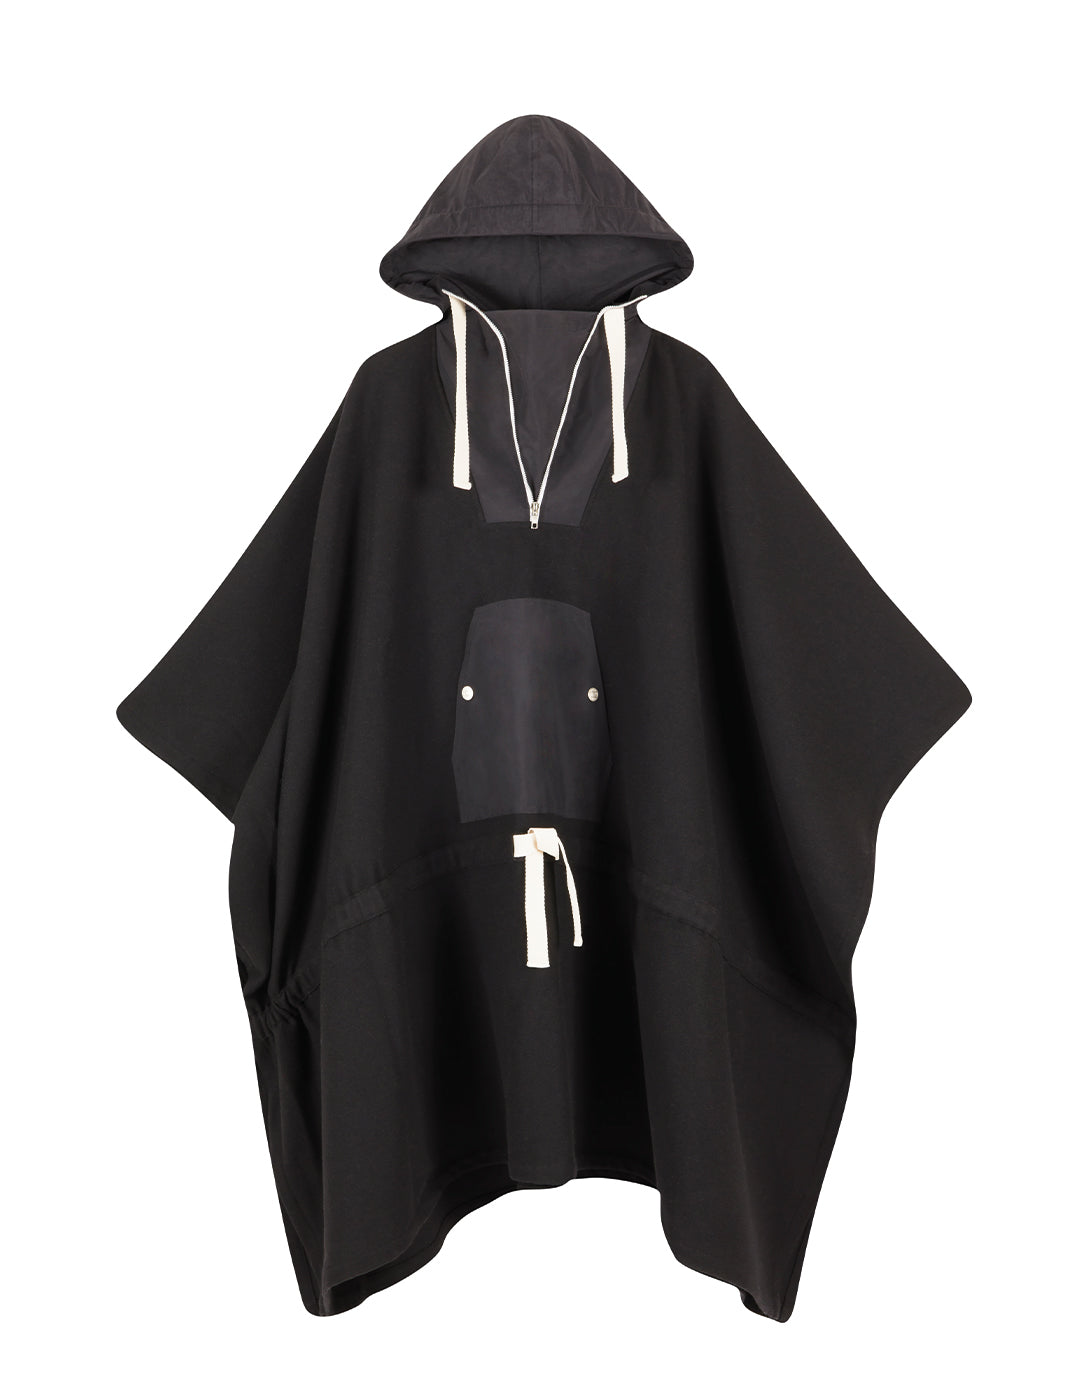 THE PONCHO IN BLACK WOOL AND NYLON